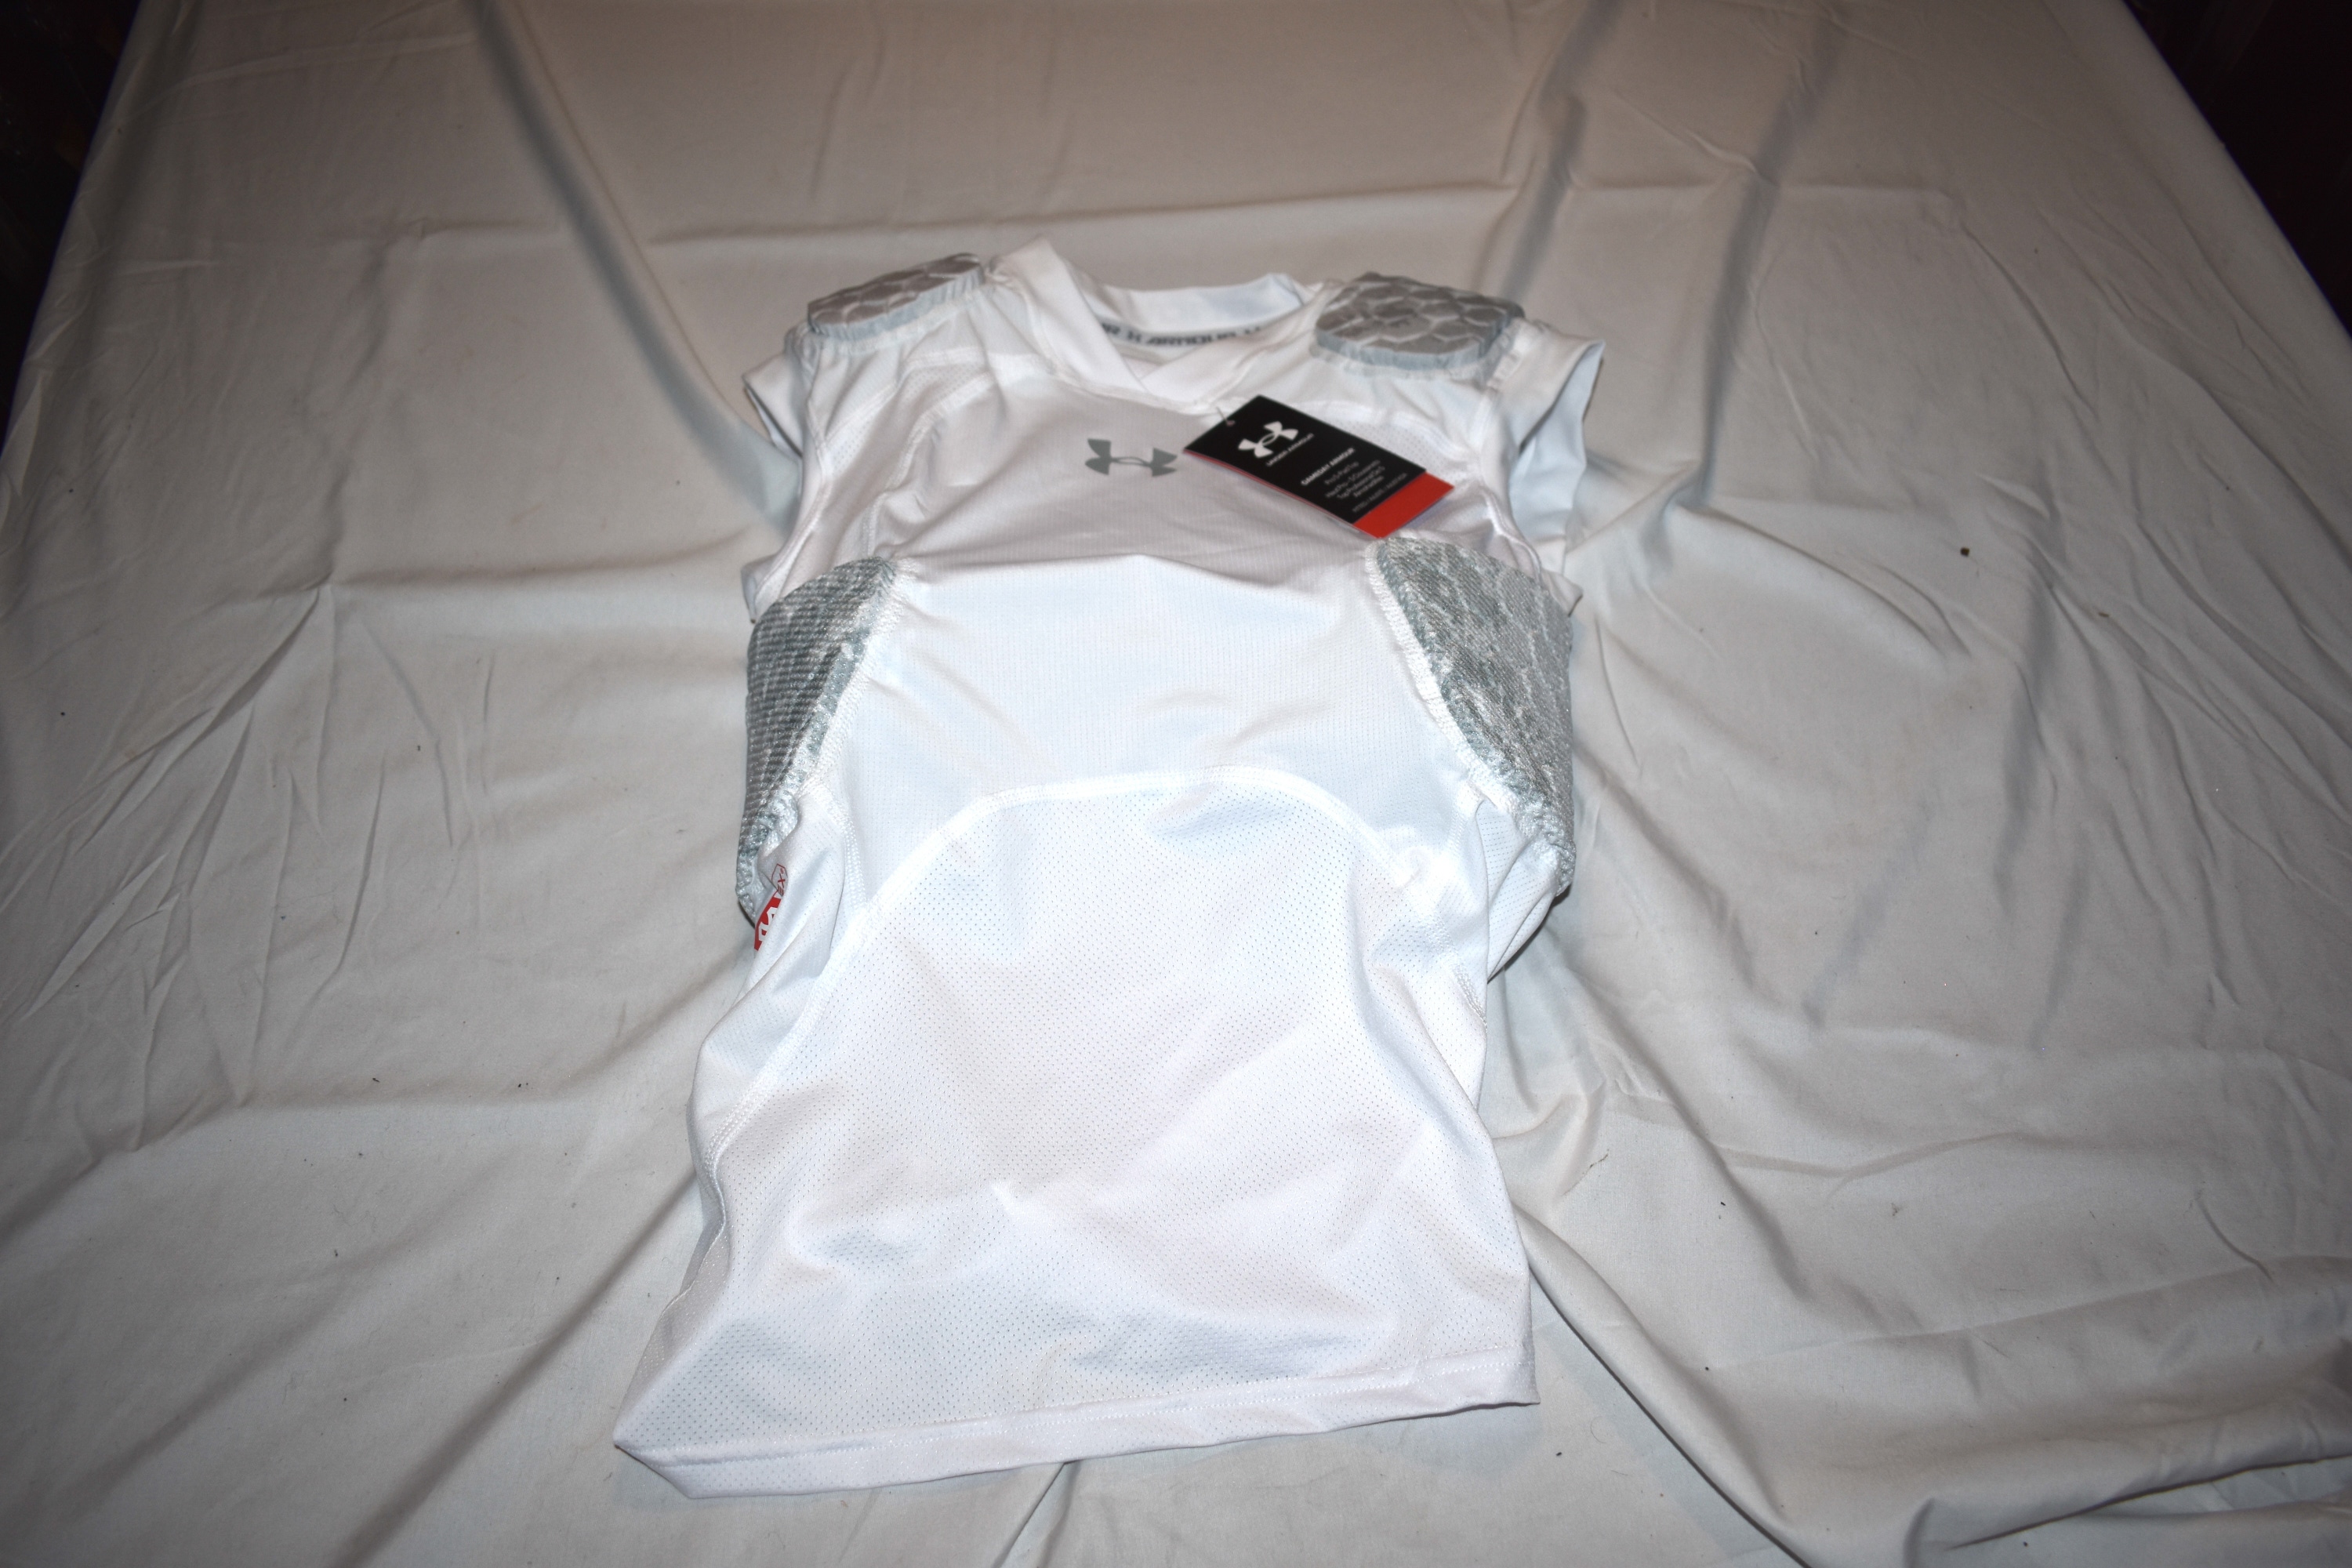 NEW - Under Armour Gameday Armor Pro w/Hex 5-Pad Protective Compression Shirt, White, Youth Large